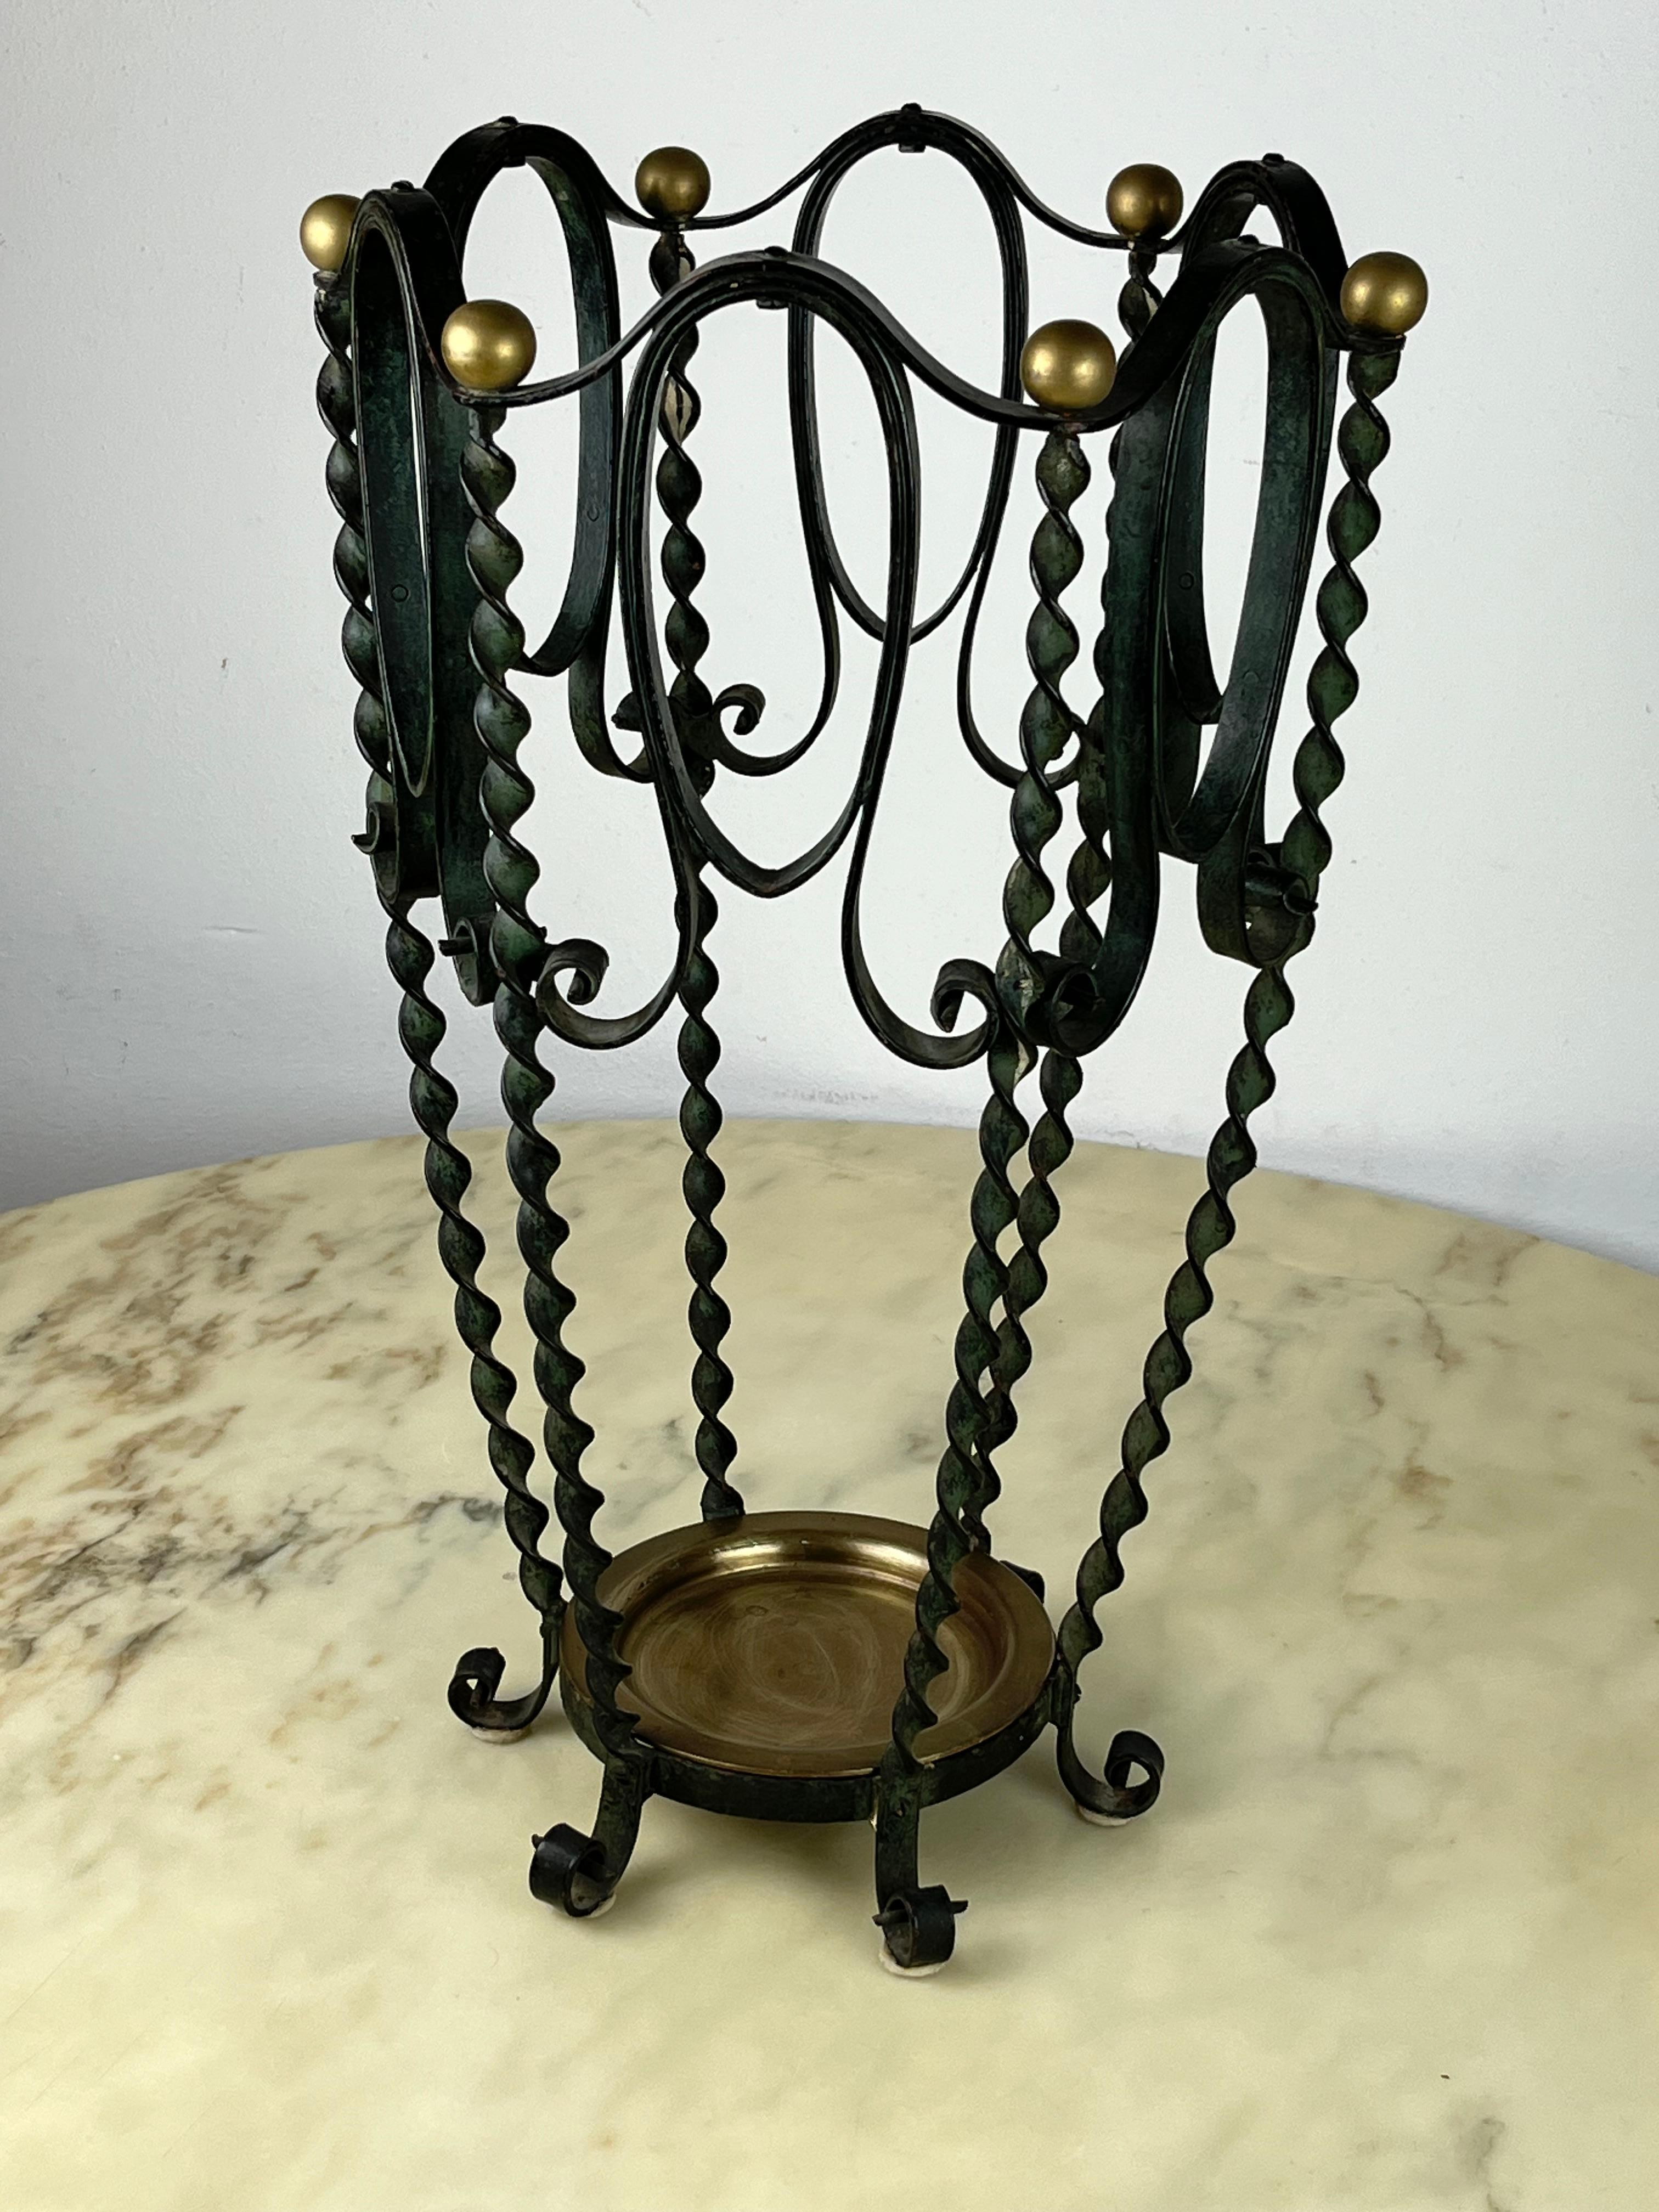 Iron and brass umbrella stand, Italy, 1930s
Found in a noble apartment. Intact and in good condition.